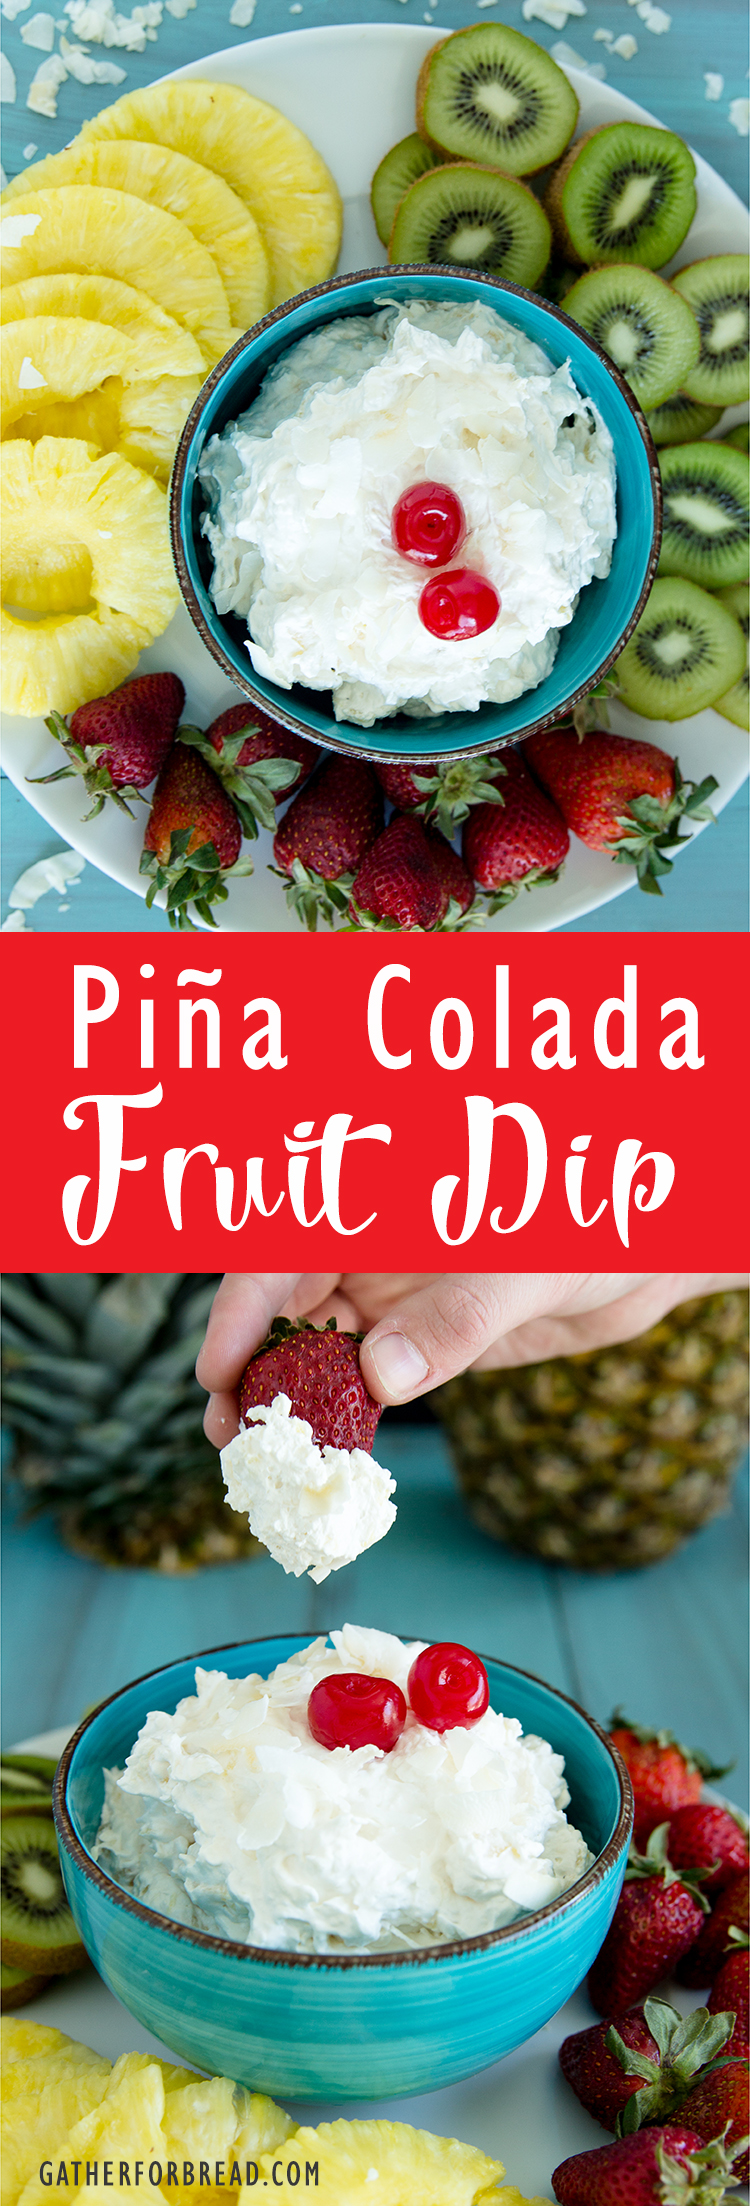 Pina Colada Fruit Dip - Delicious creamy pina colada dip. Whips up with 4 easy ingredients. Made in minutes, perfect for dipping with fruits; strawberries, pineapple and kiwi.